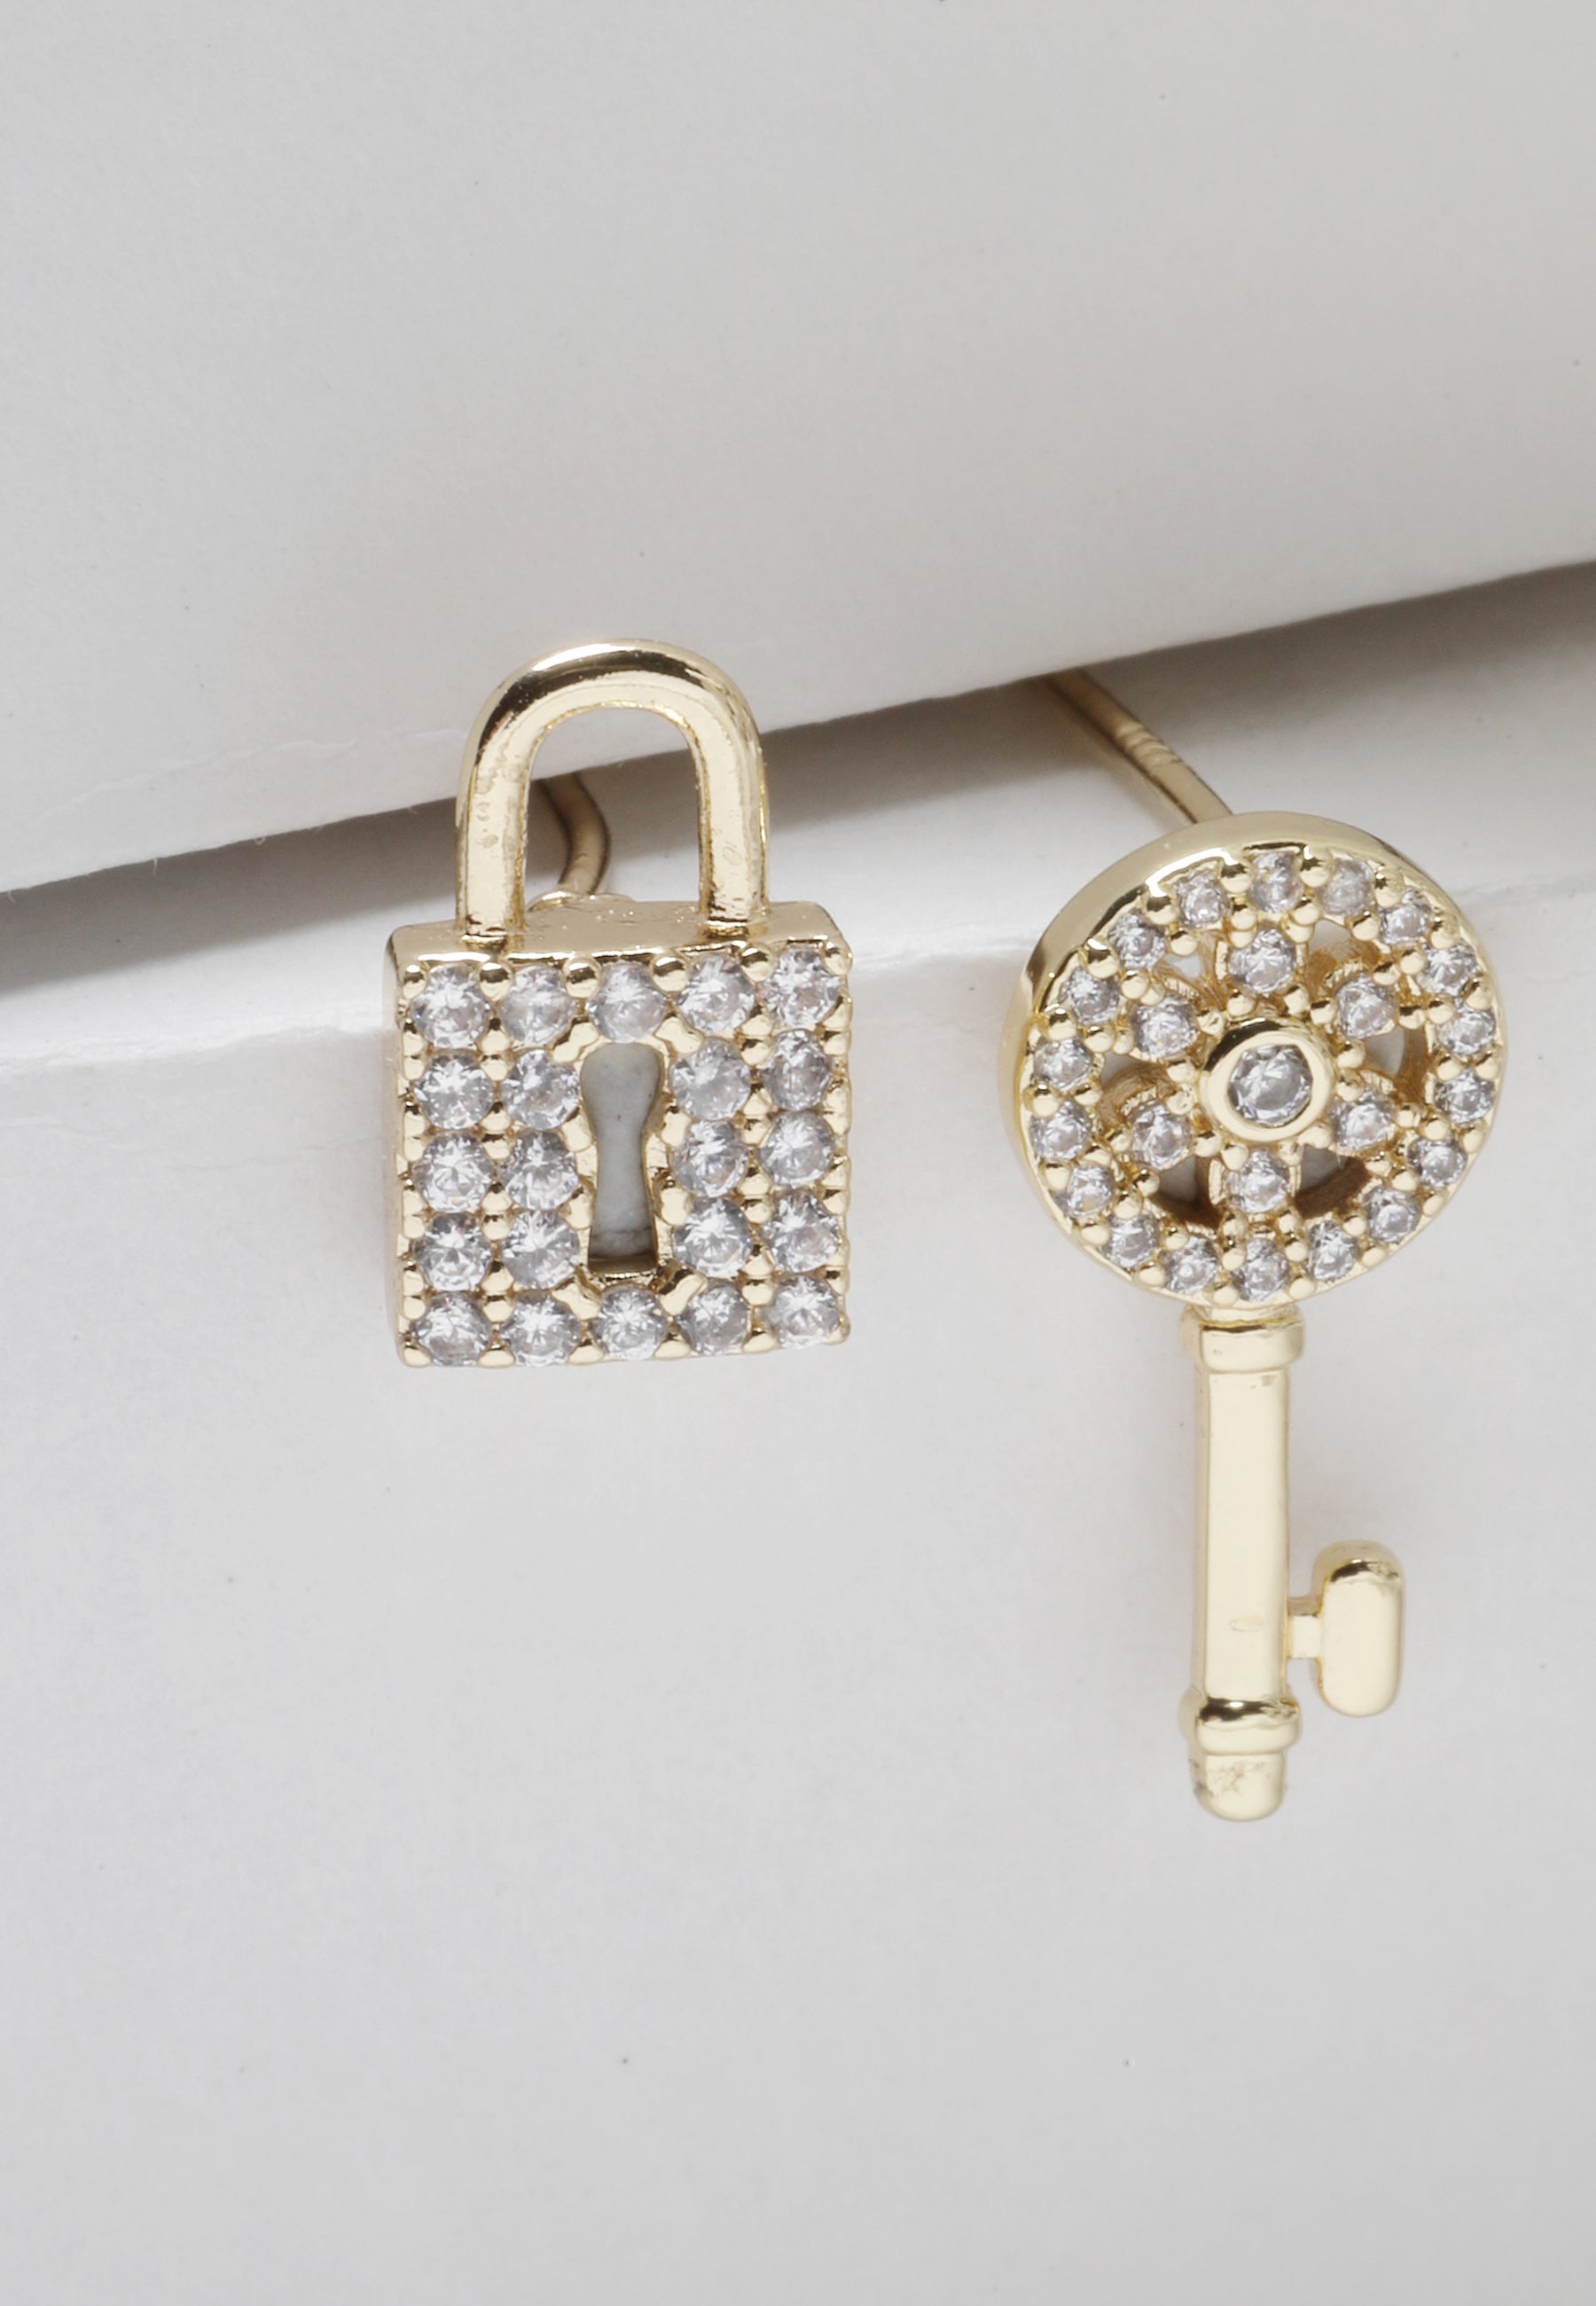 Gold-Plated Padlock And Key Stud Earrings